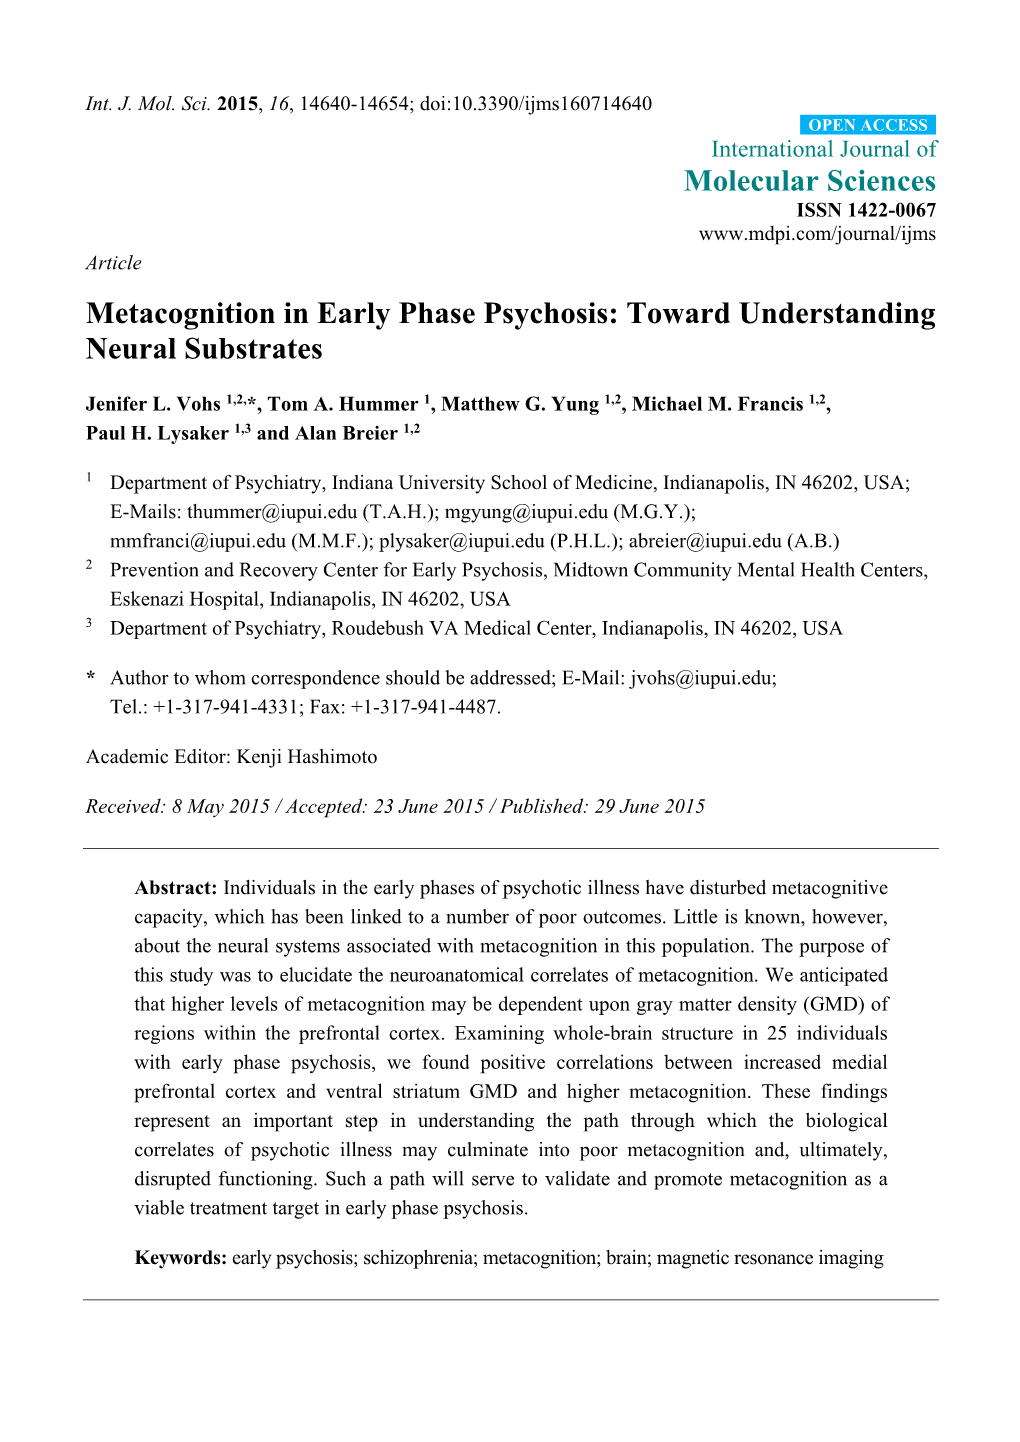 Metacognition in Early Phase Psychosis: Toward Understanding Neural Substrates